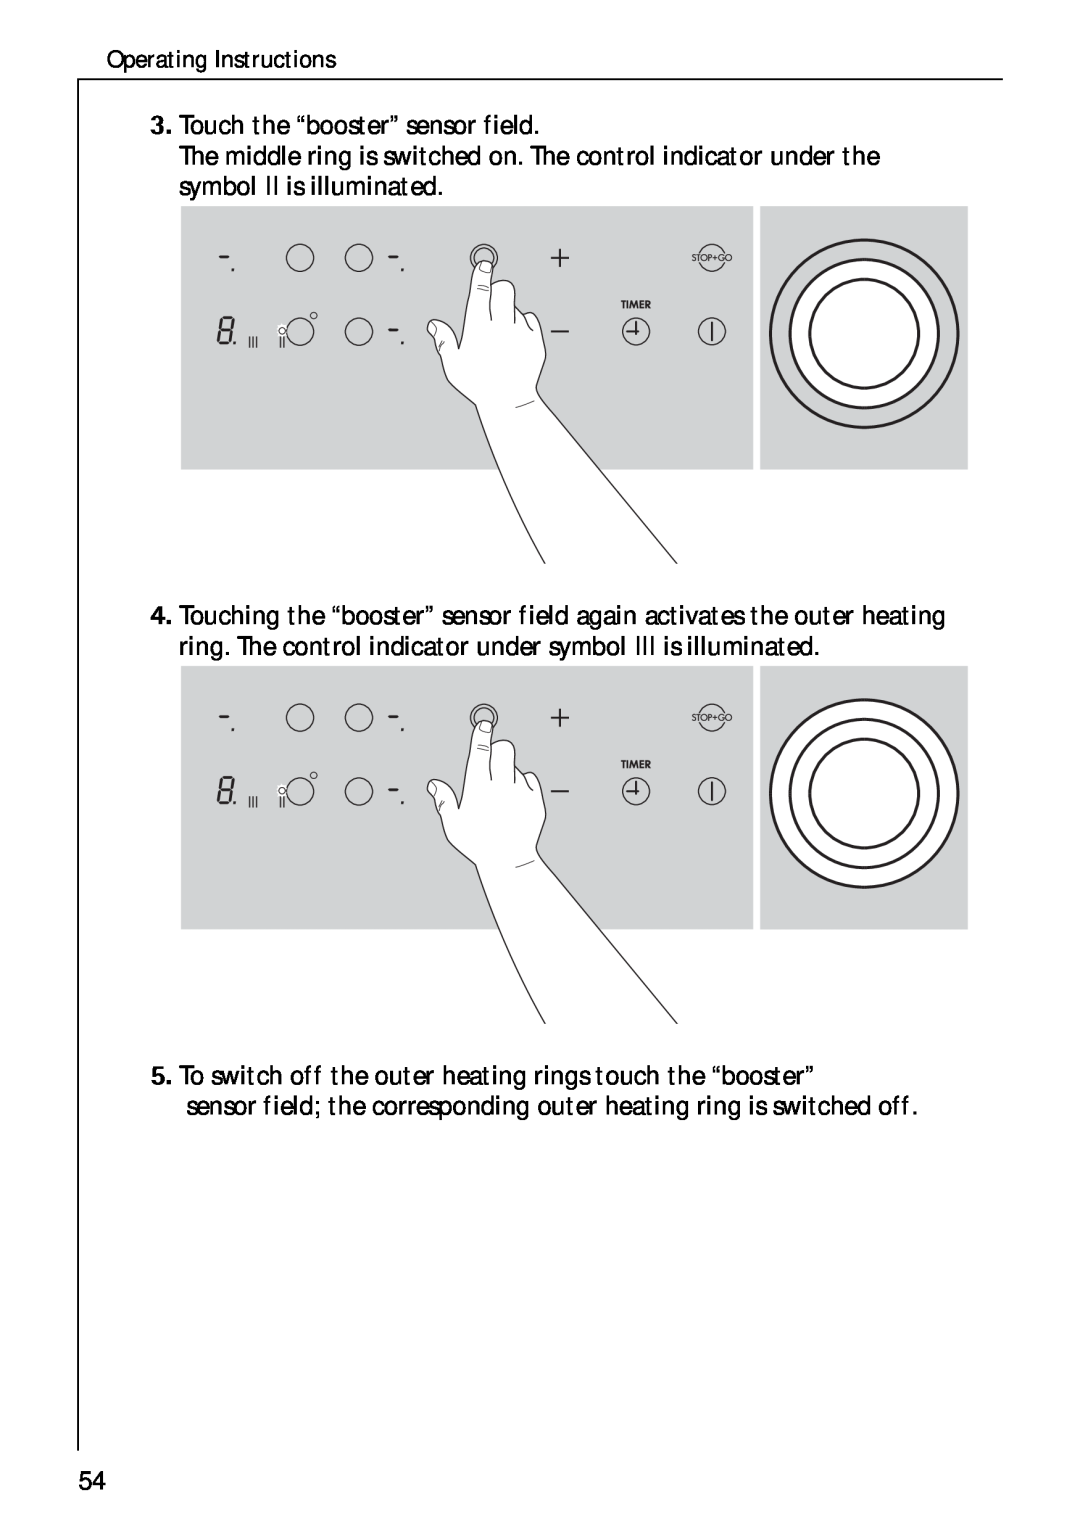 Electrolux C75301K operating instructions Touch the “booster” sensor field 